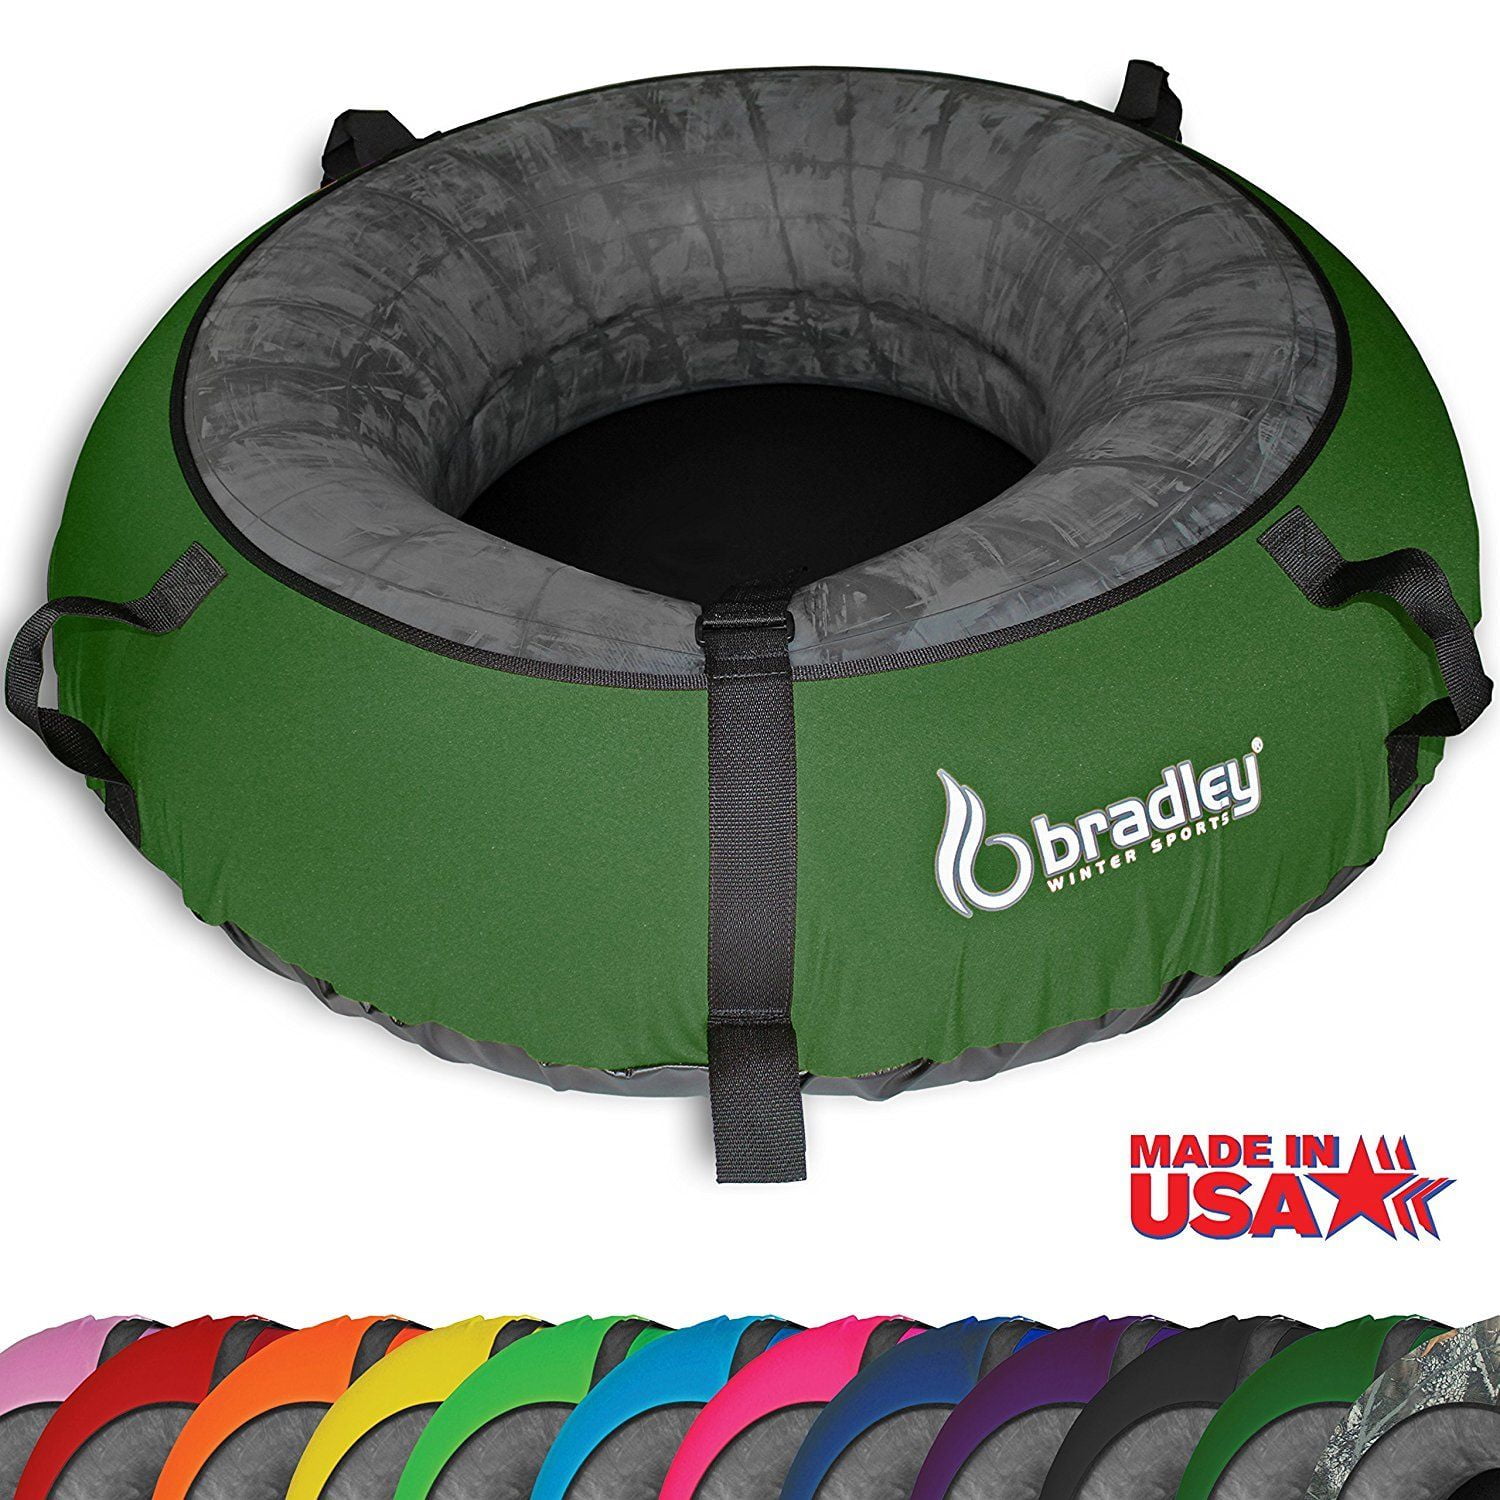 CHOOSE YOUR COLOR COLOSSAL 54" INFLATED SNOW TUBE WITH MATCHING SEAT CUSHION 